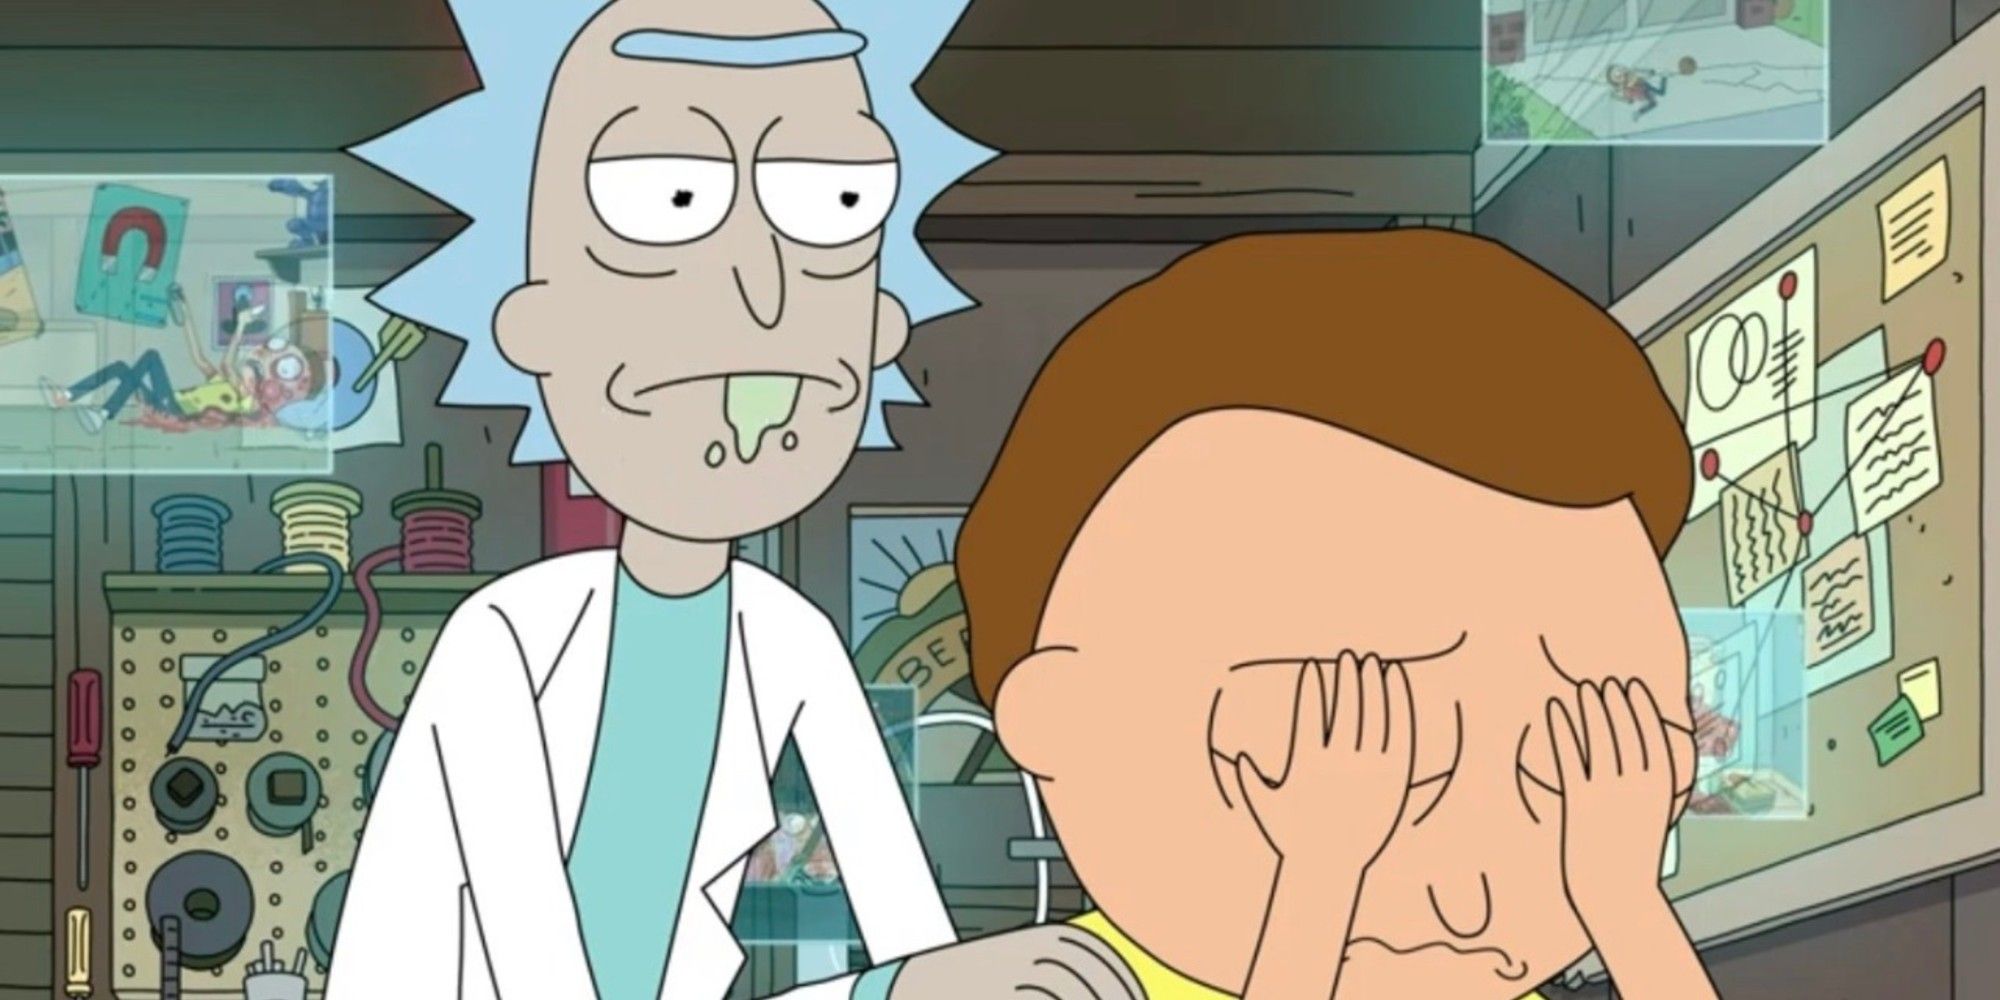 Rick watches Morty cry and puts his hand on his shoulder